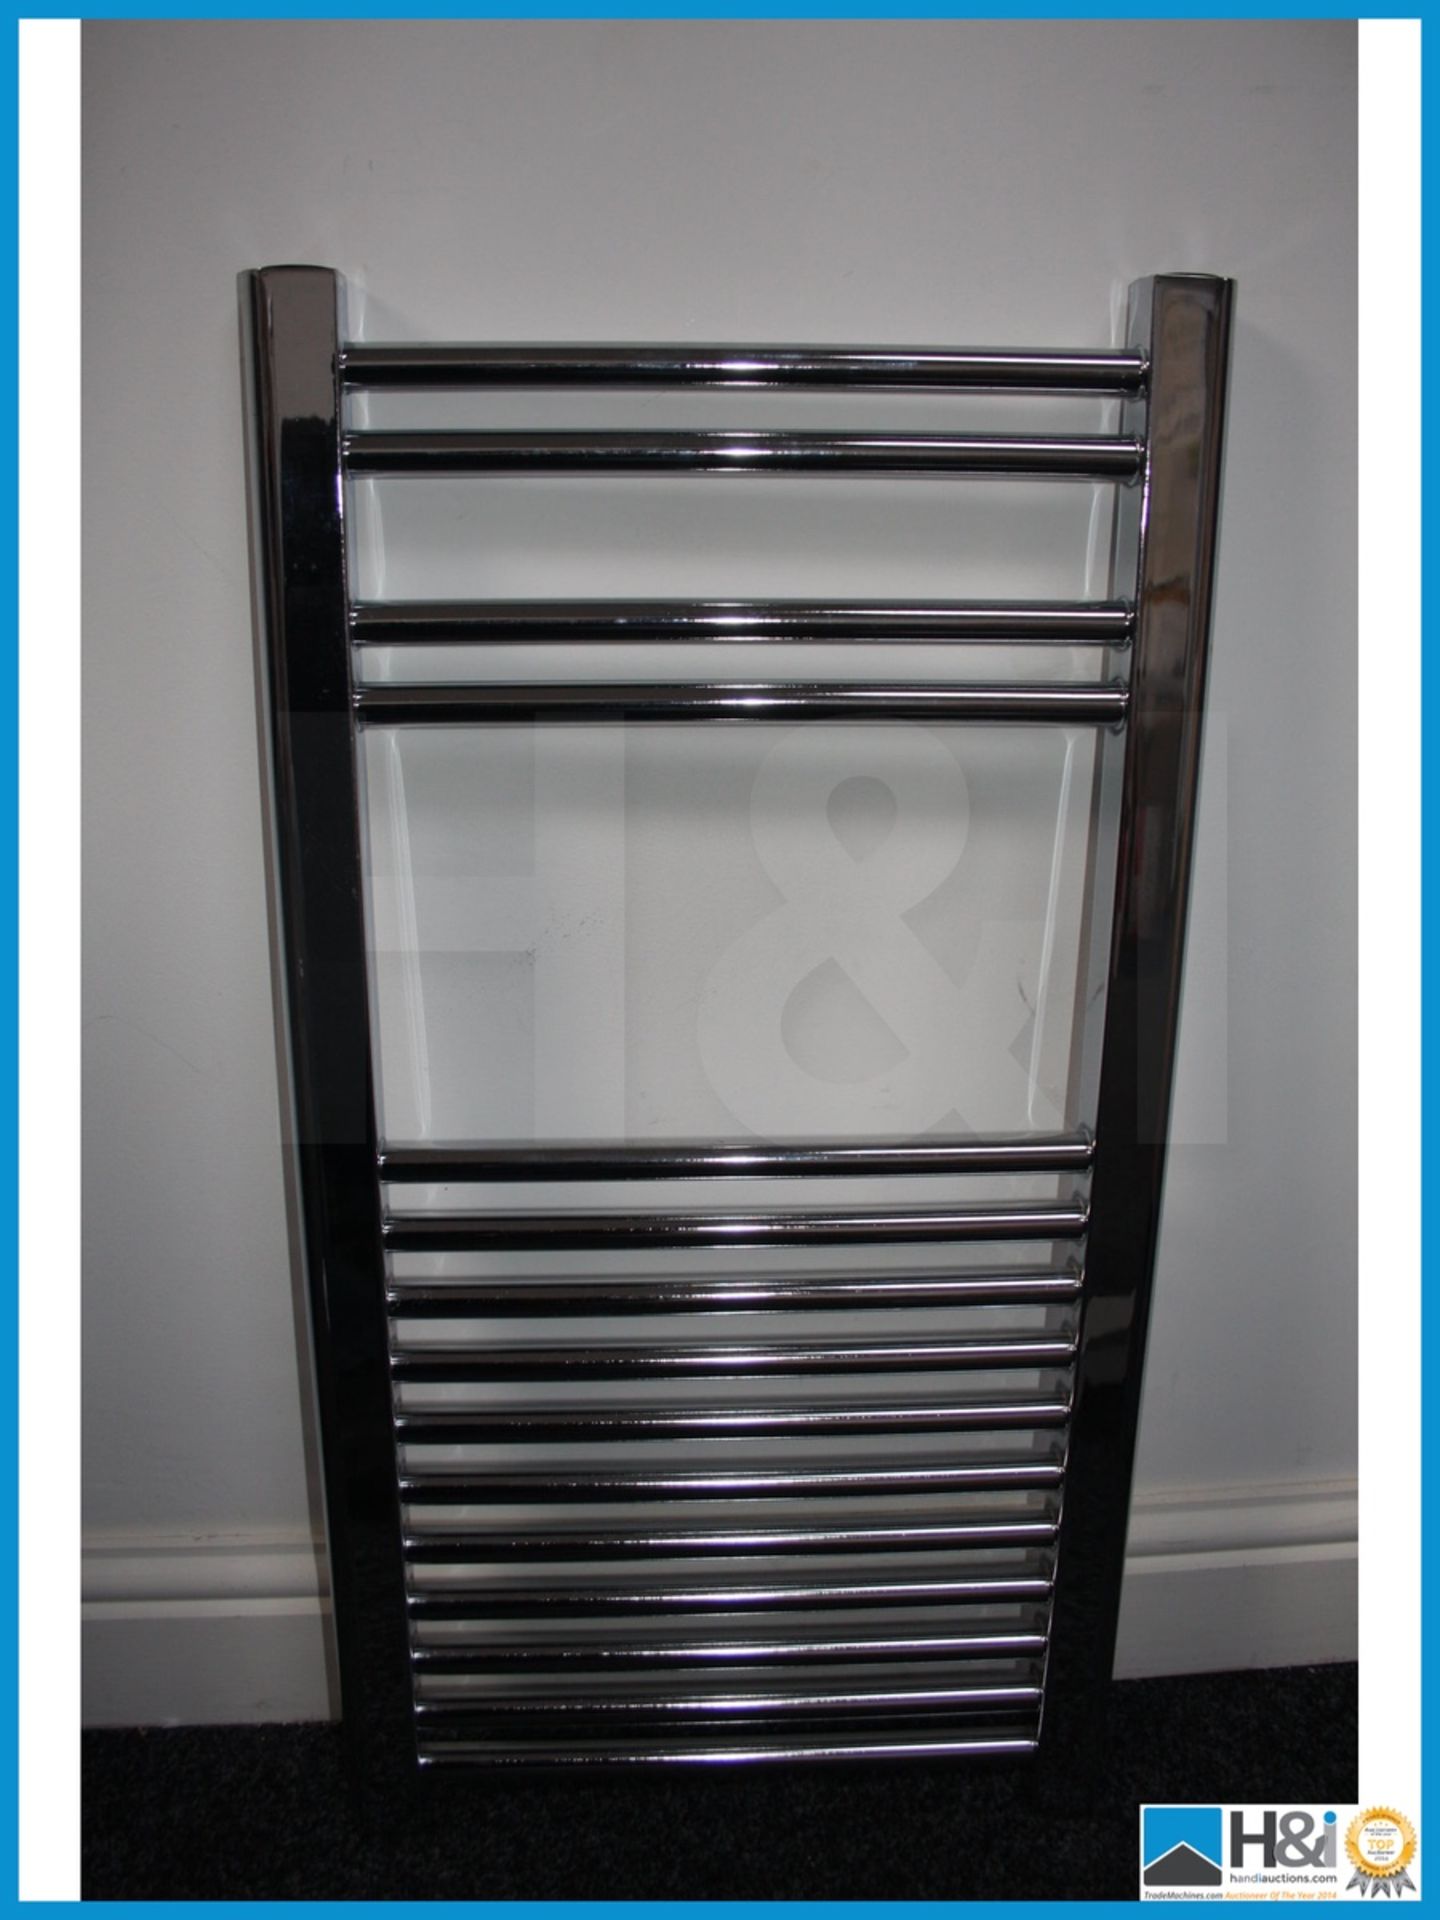 Chrome heated towel rail with fittings unused and boxed 760 x 400 mm. Appraisal: Viewing Essential - Image 2 of 3